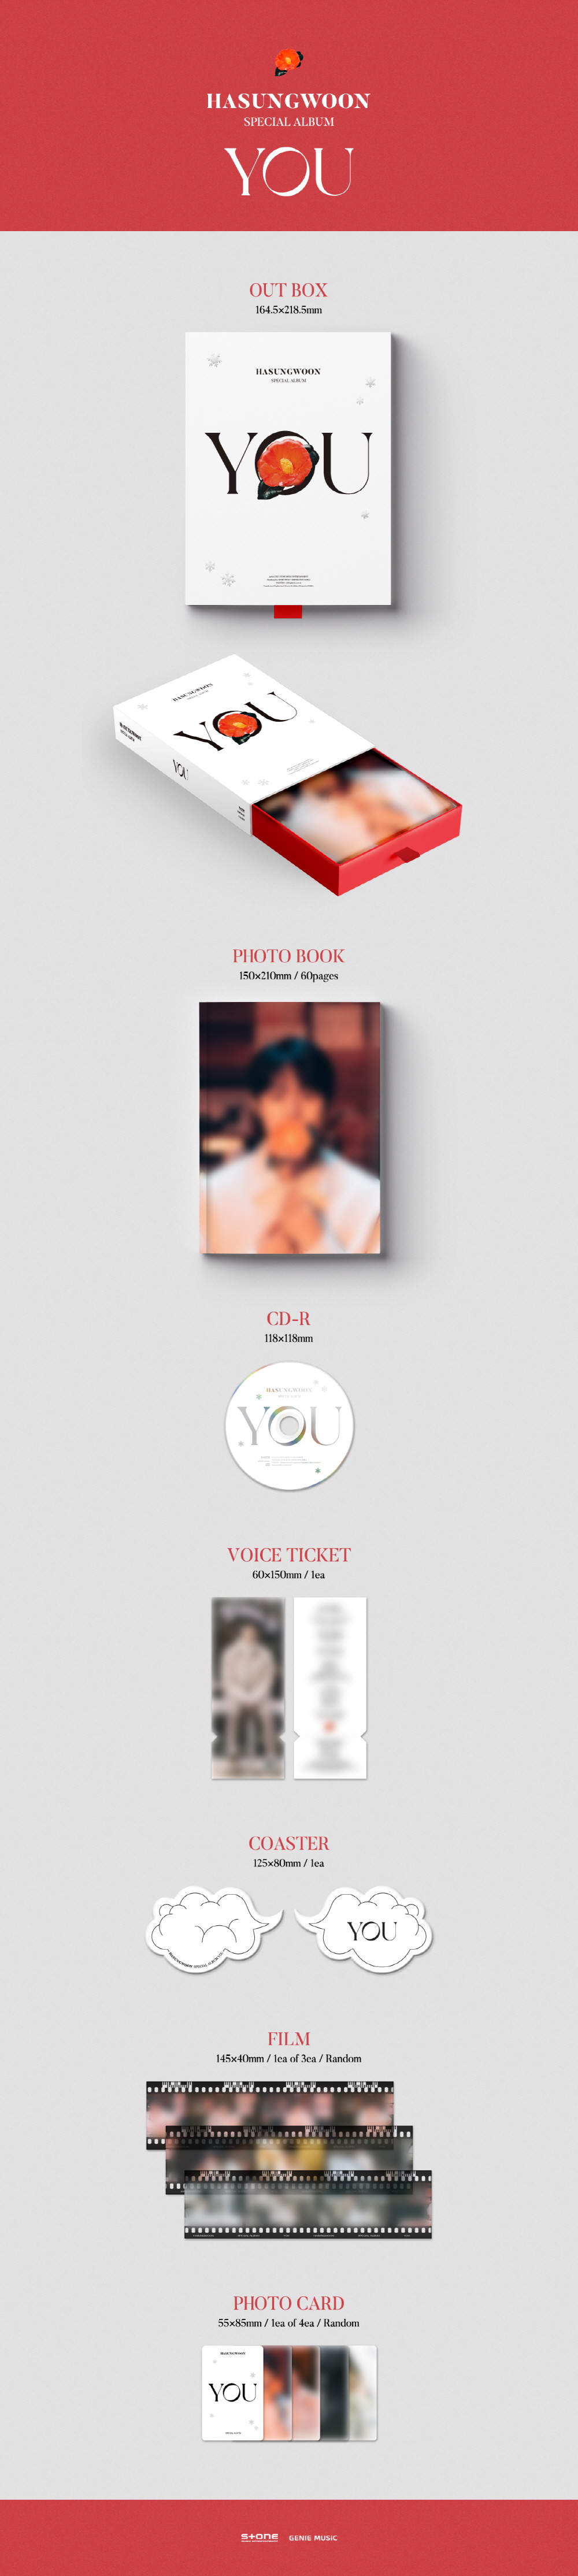 HA SUNGWOON - SPECIAL ALBUM [YOU] HASUNGWOON HASUNGWOONalbum HASUNGWOONCD HASUNGWOONgoods HASUNGWOONphotocard HASUNGWOONspecialAlbum HASUNGWOONPhotoBook HASUNGWOONYOU YOU K-POPAlbum K-POP KPOP KPOPalbum KPOPCD